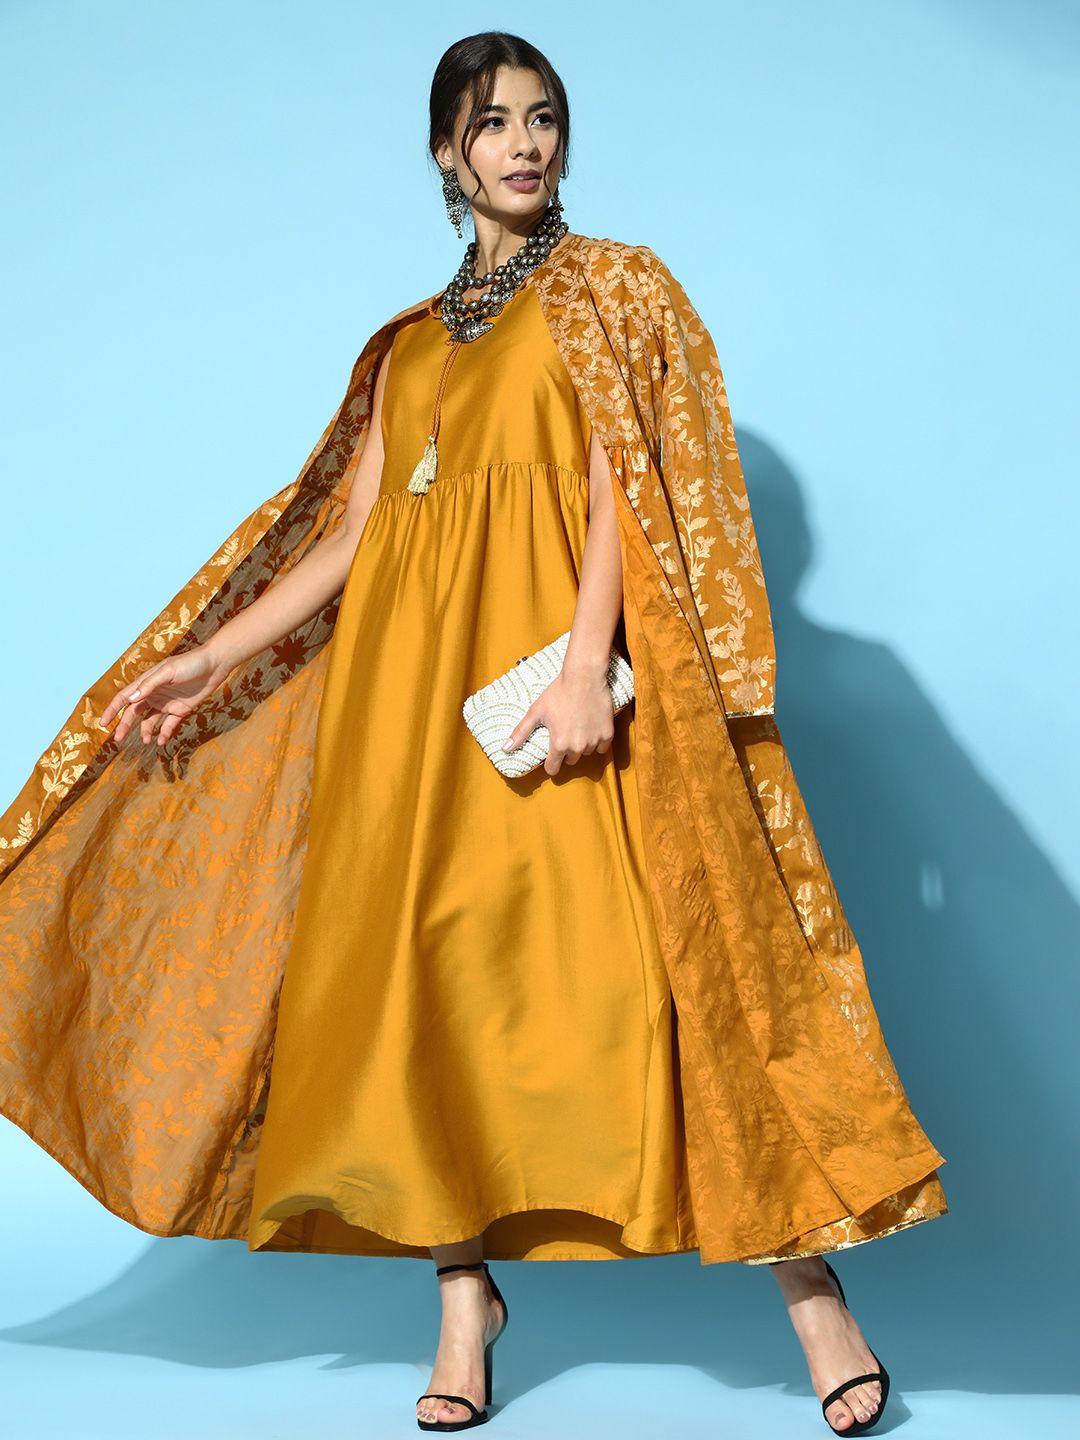 all about you mustard yellow & golden ethnic motifs print maxi dress with longline jacket